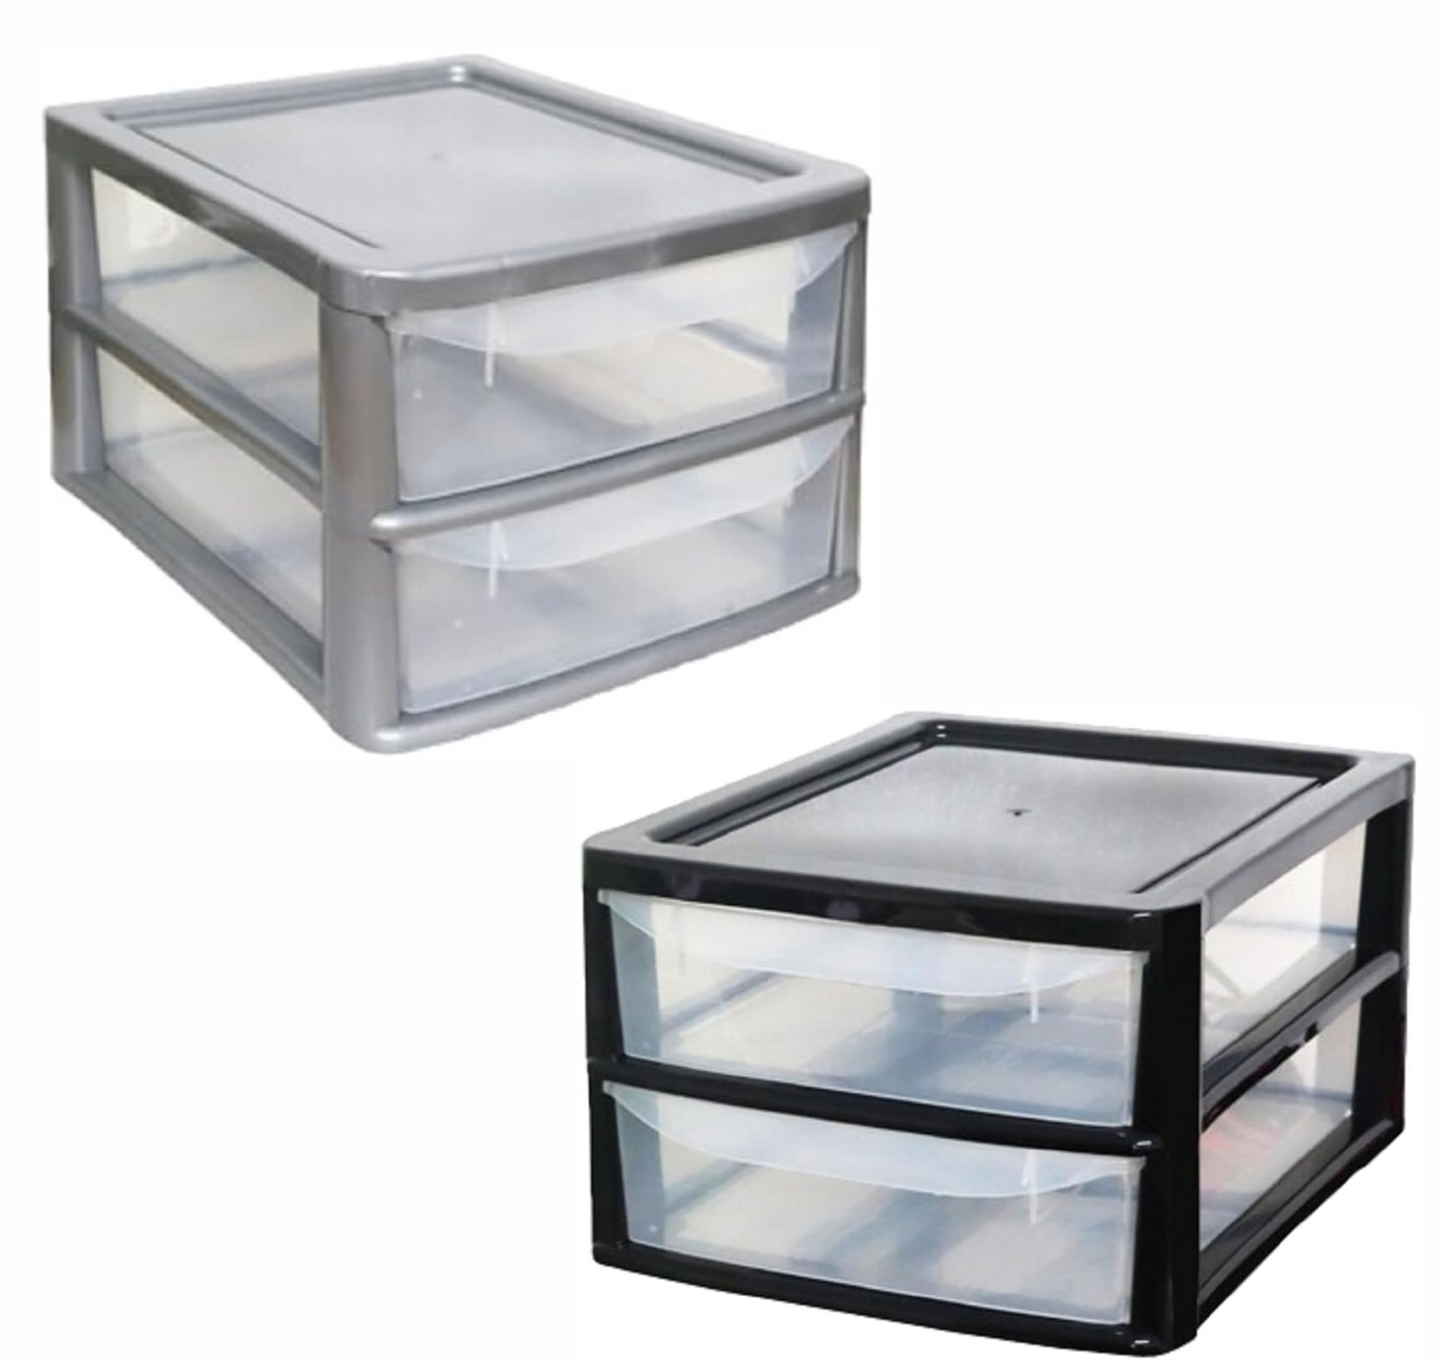 PLASTIC STORAGE DRAWERS 2 TIER A4| SMALL CLEAR SILVER TOWER UNIT | OFFICE DESKTOP TABLETOP ORGANISER HOME SCHOOL BEDROOM LIVING ROOM | 20 cm HEIGHT, 35 cm DEPTH, 28 cm WIDTH